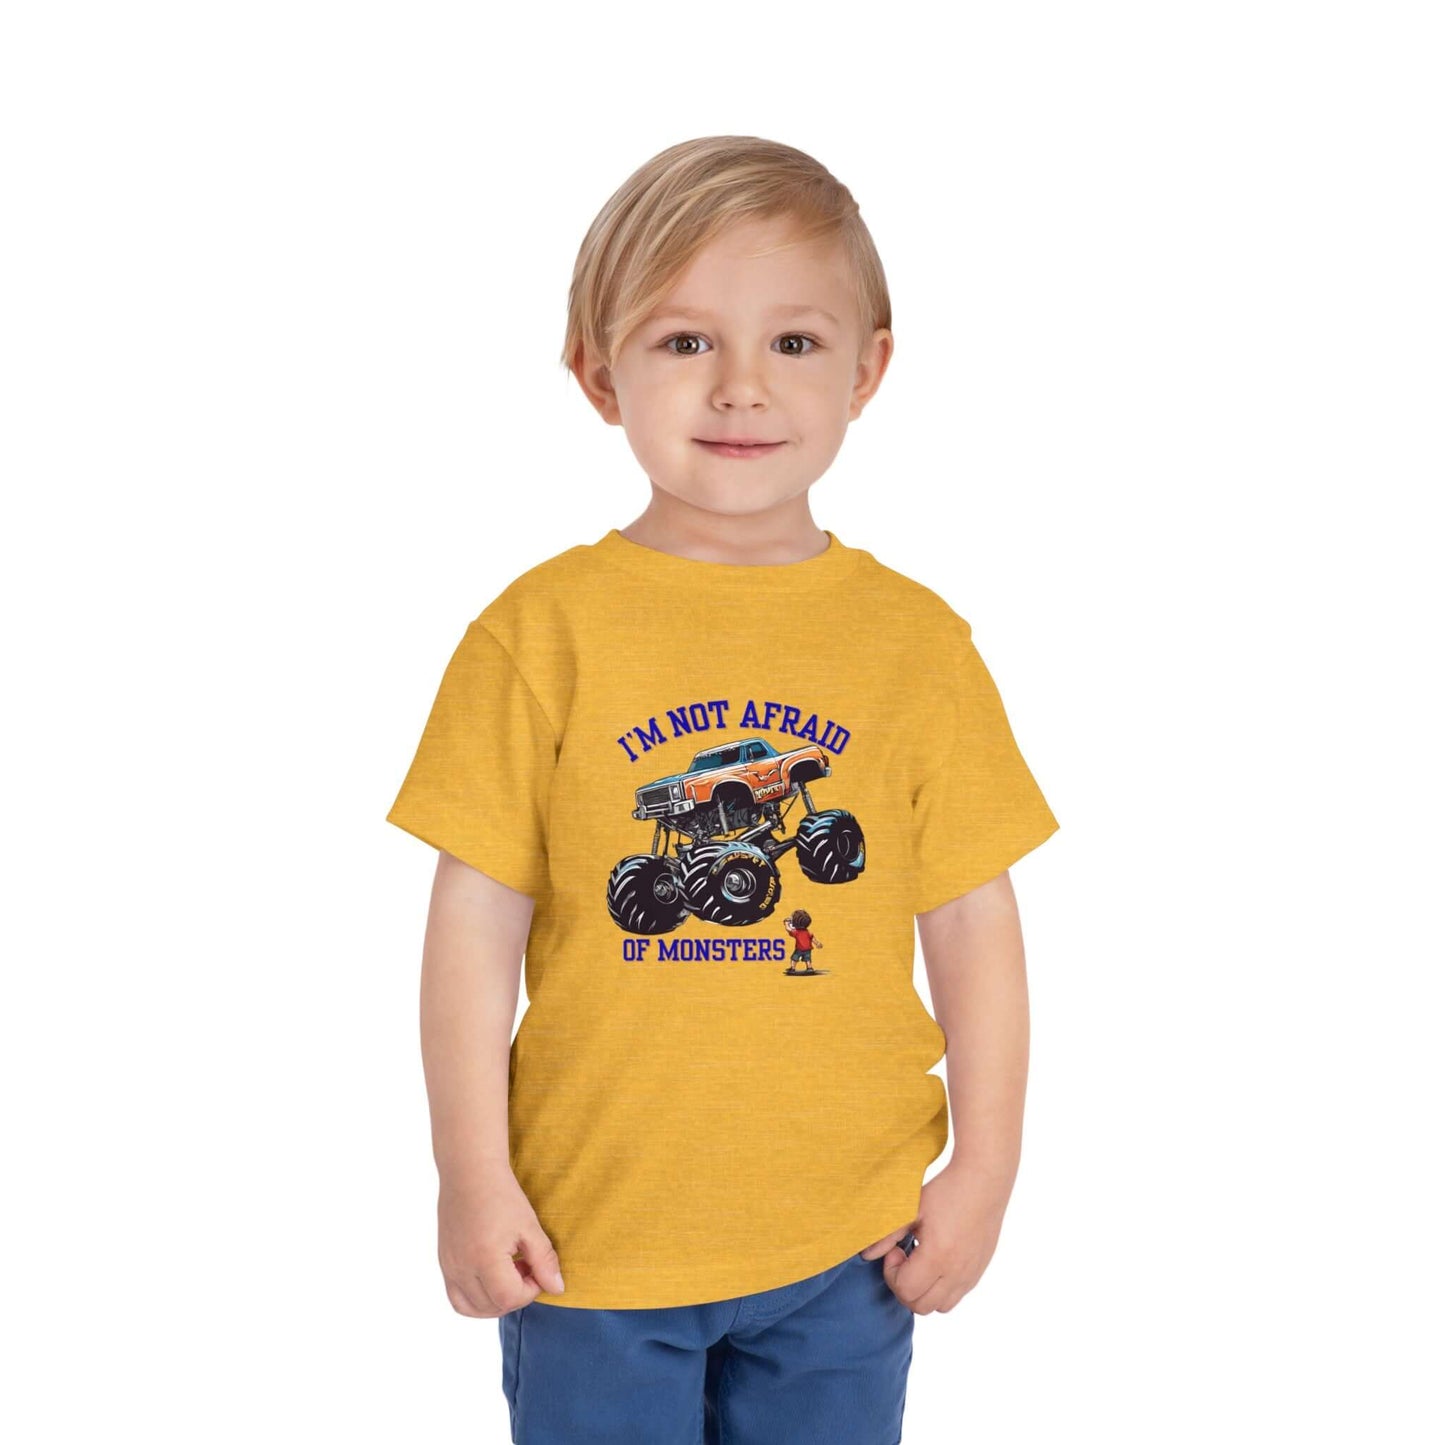 Cotton,Crew neck,DTG,Kids' Clothing,Monster truck shirt kids,Monster truck tshirt,Neck Labels,Regular fit,T-shirts